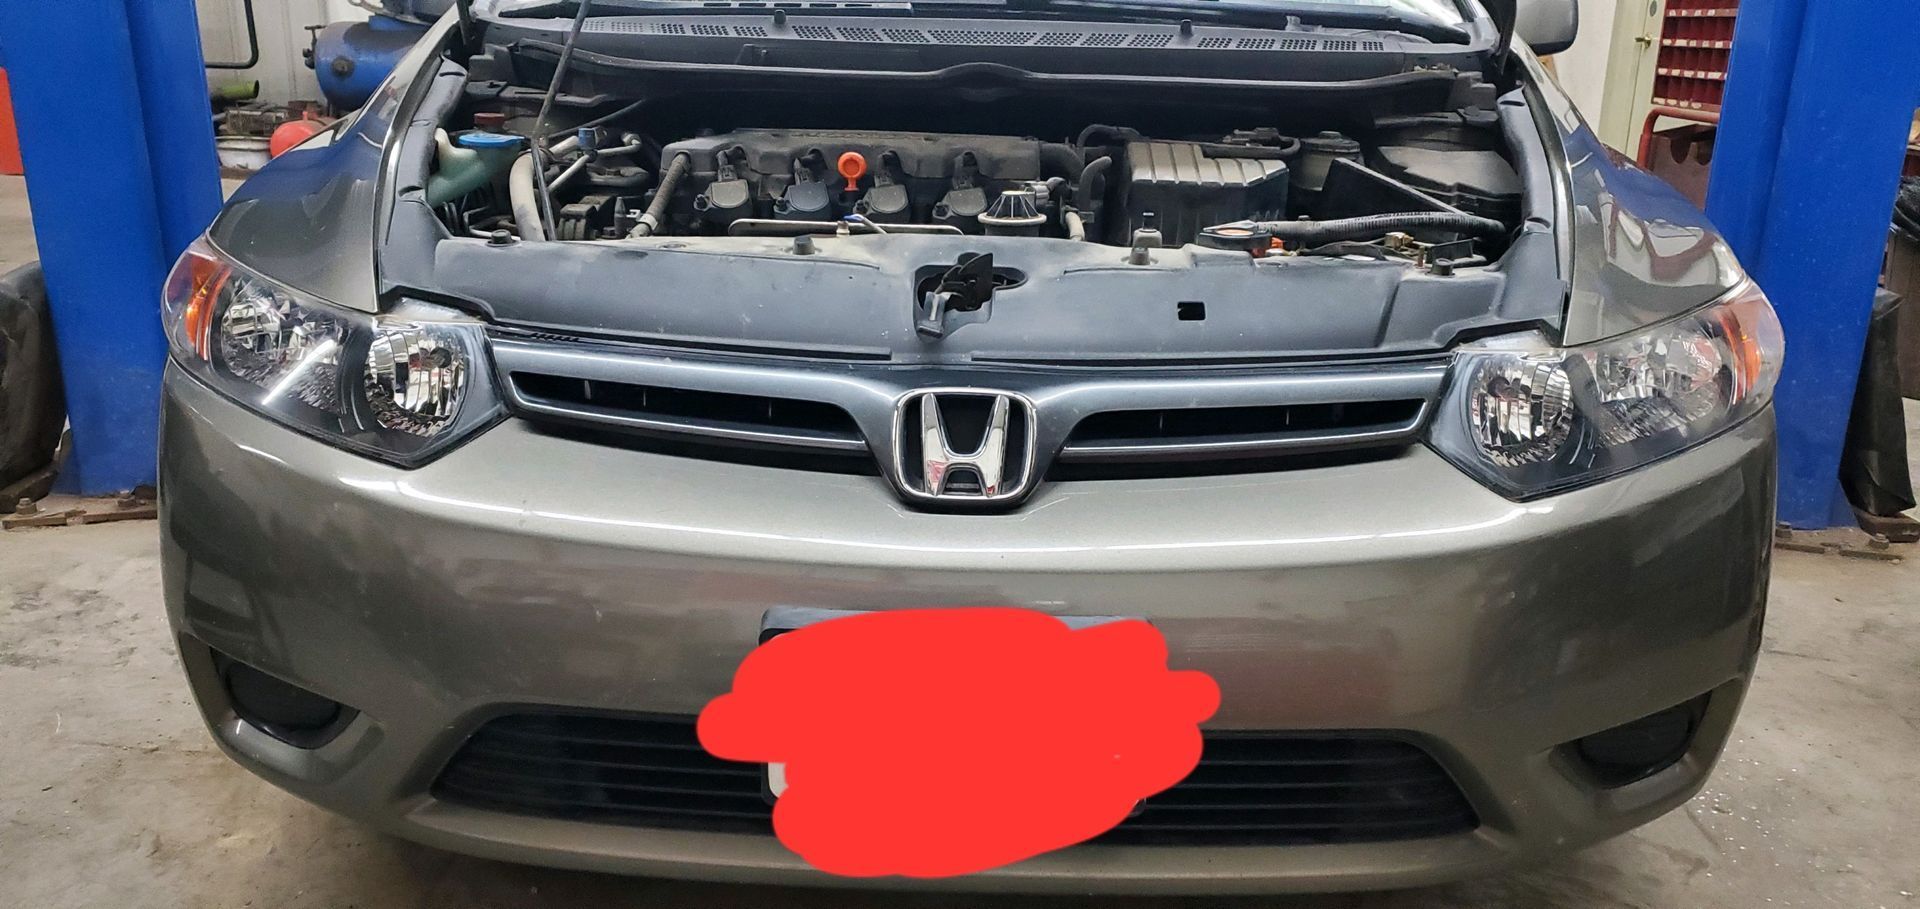 a gray honda civic with the hood up in a garage